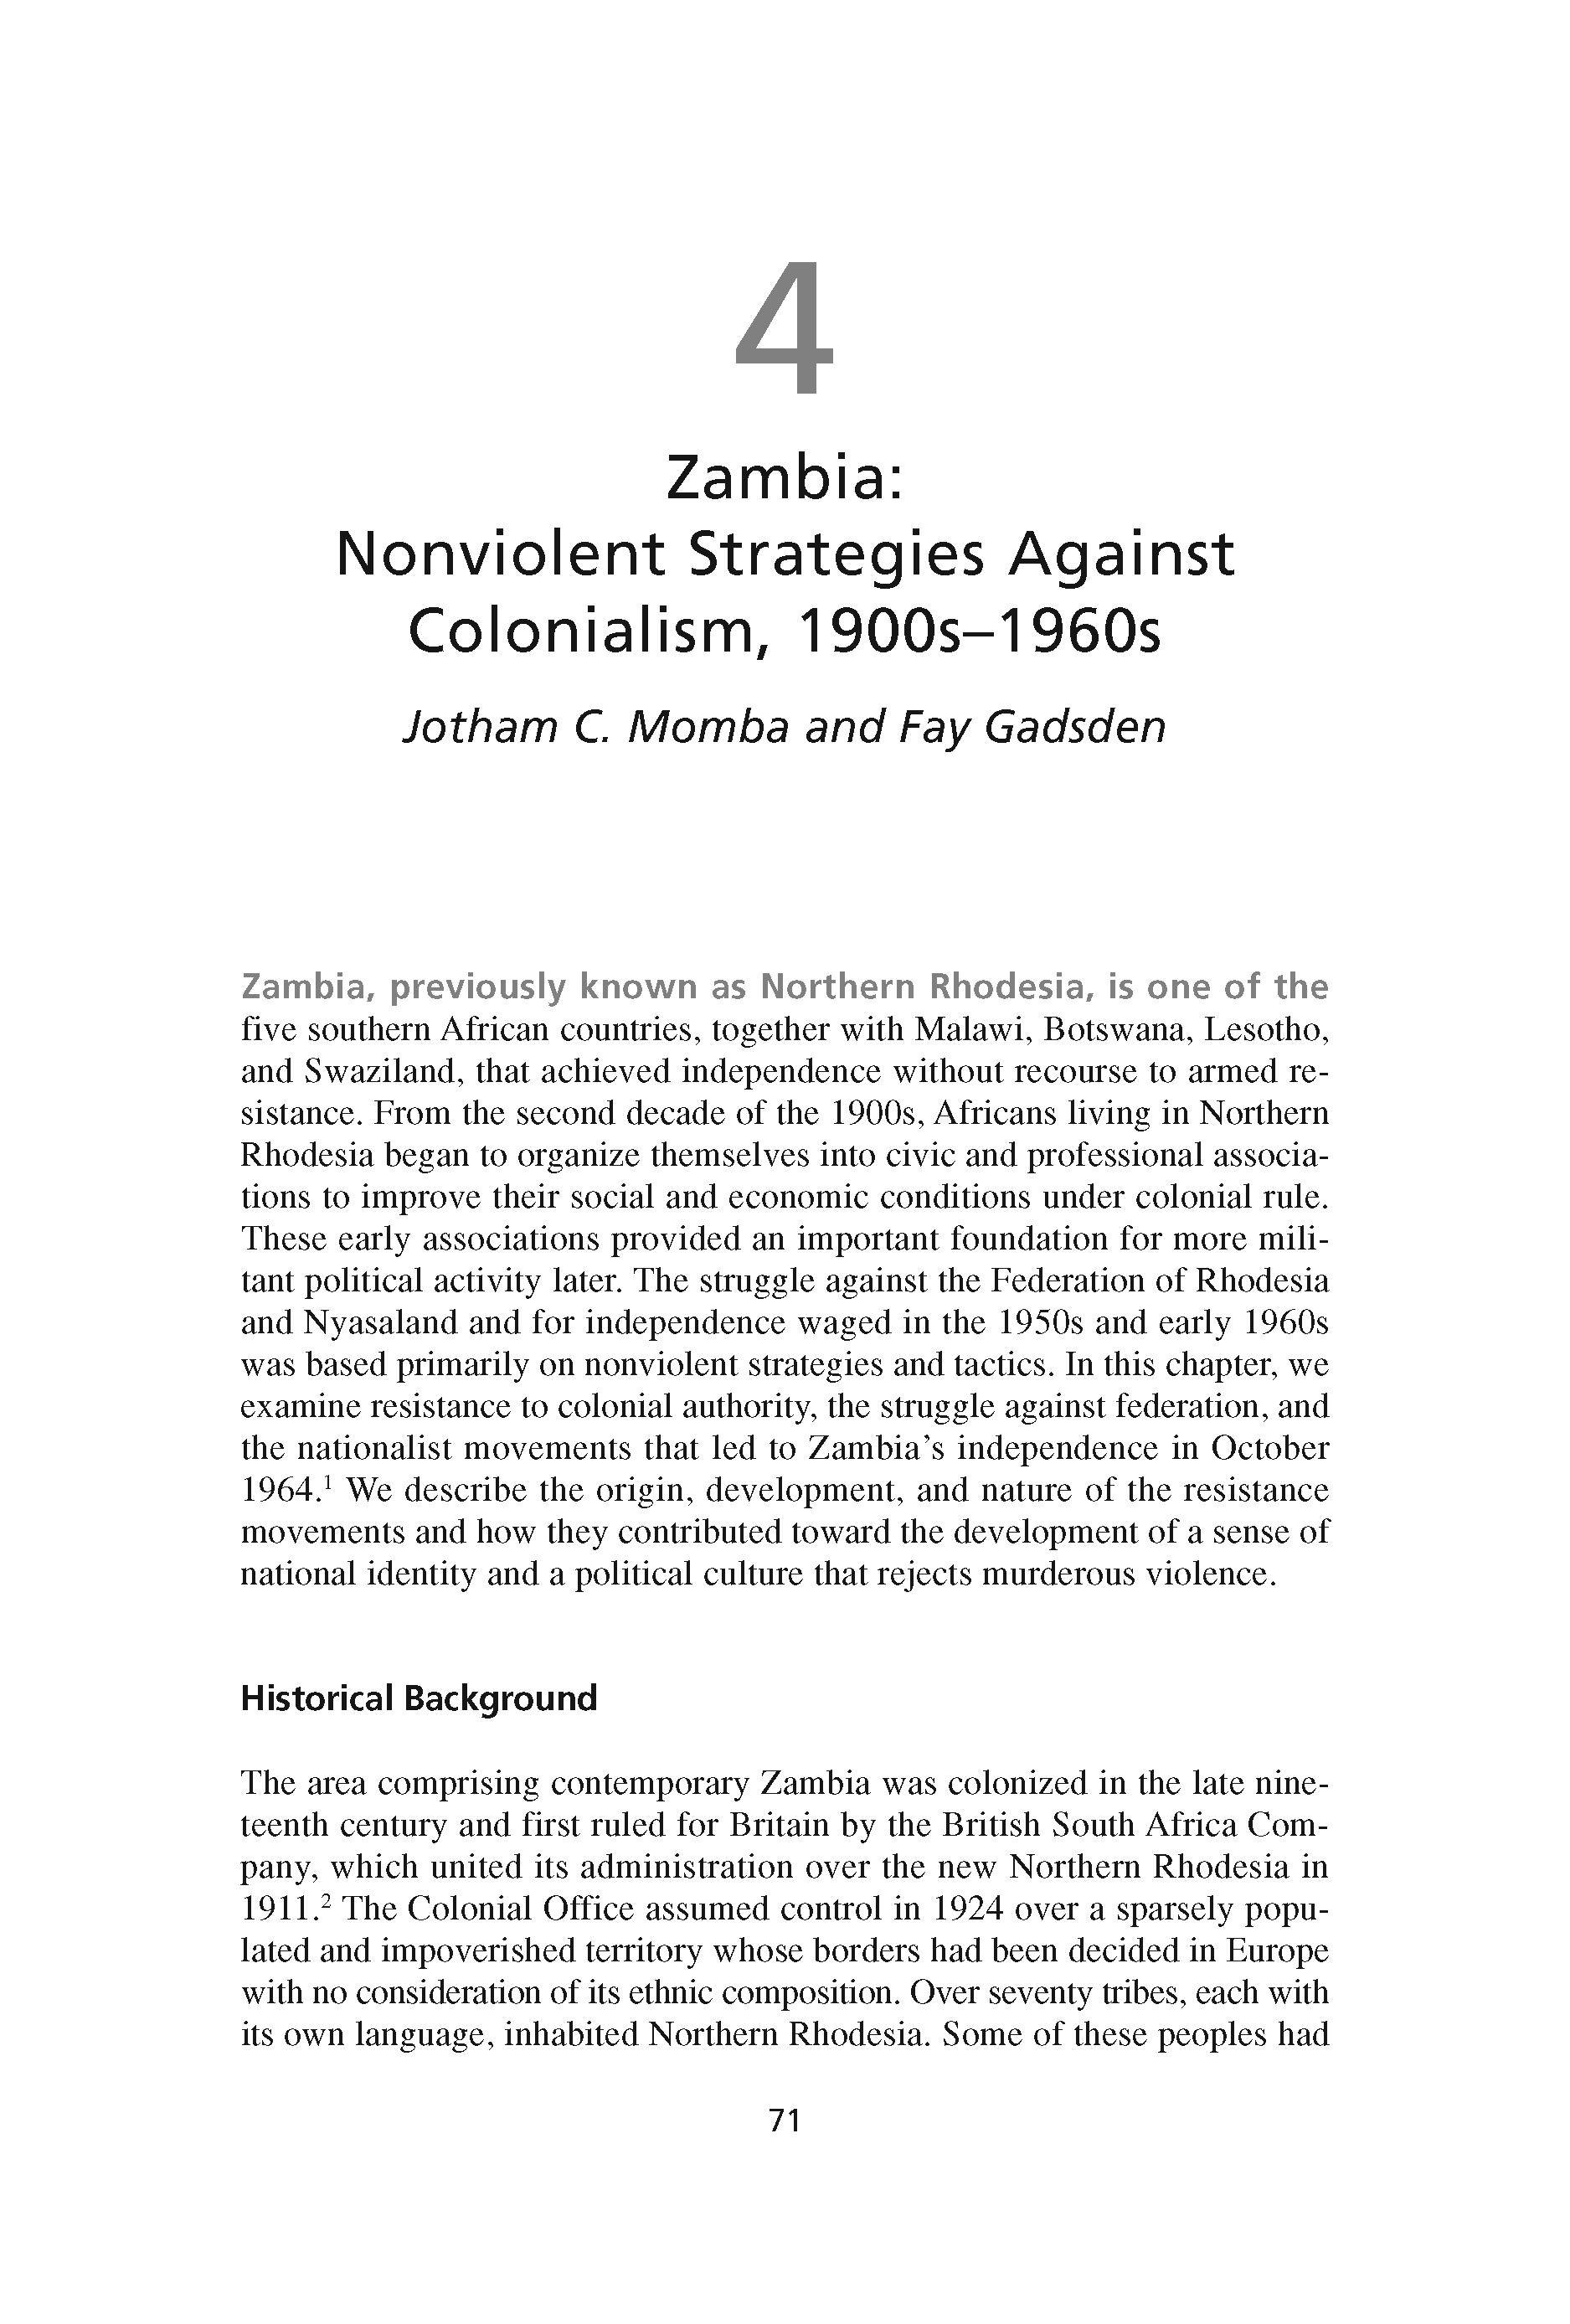 Zambia: Nonviolent Strategies Against Colonialism, 1900s-1960s (Chapter 4 from ‘Recovering Nonviolent History’)